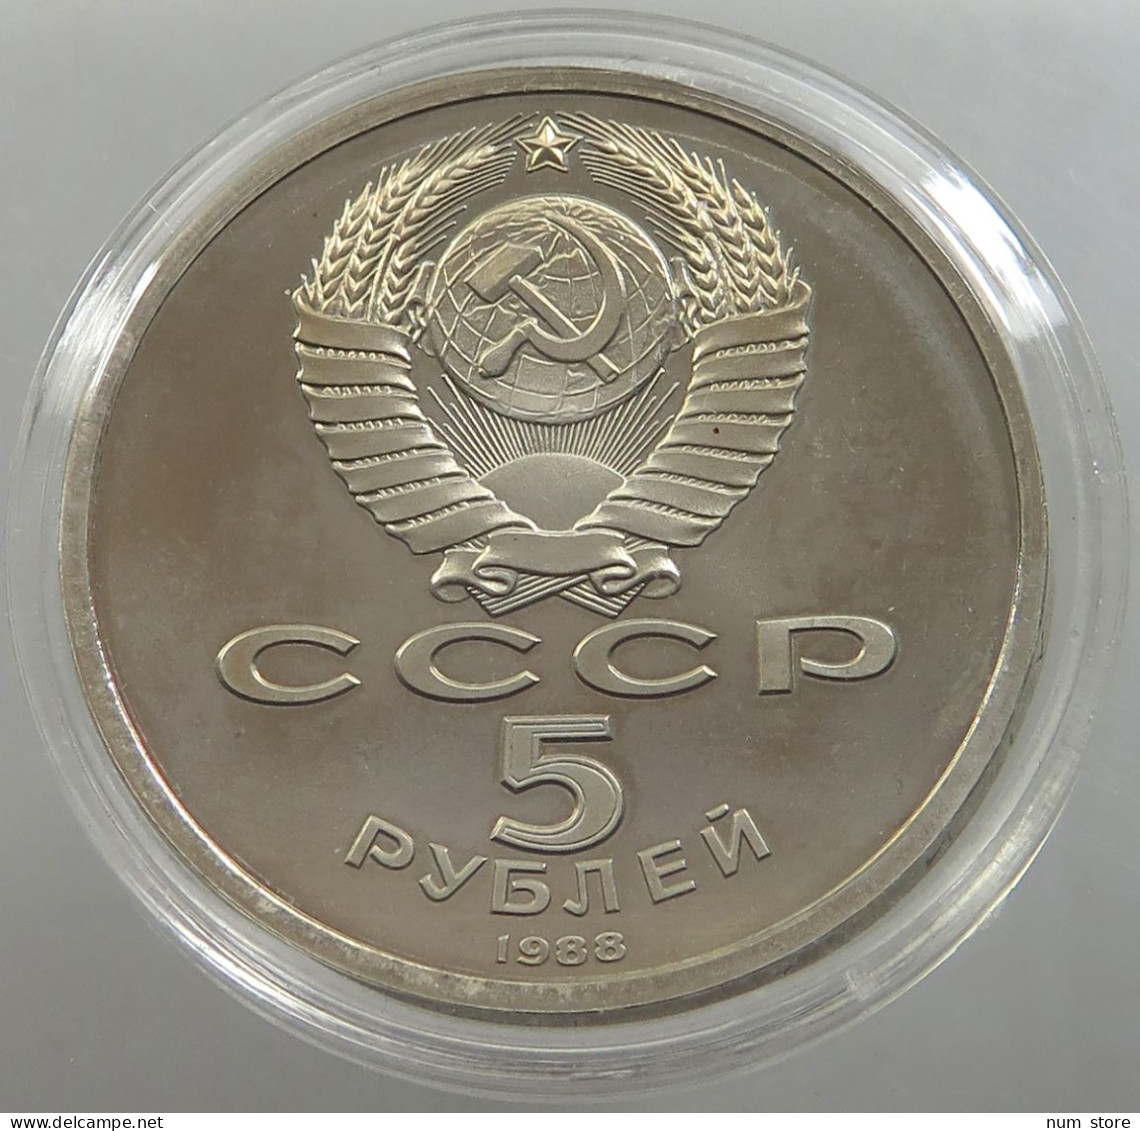 RUSSIA USSR 5 ROUBLES 1988 PROOF #sm14 0451 - Russie